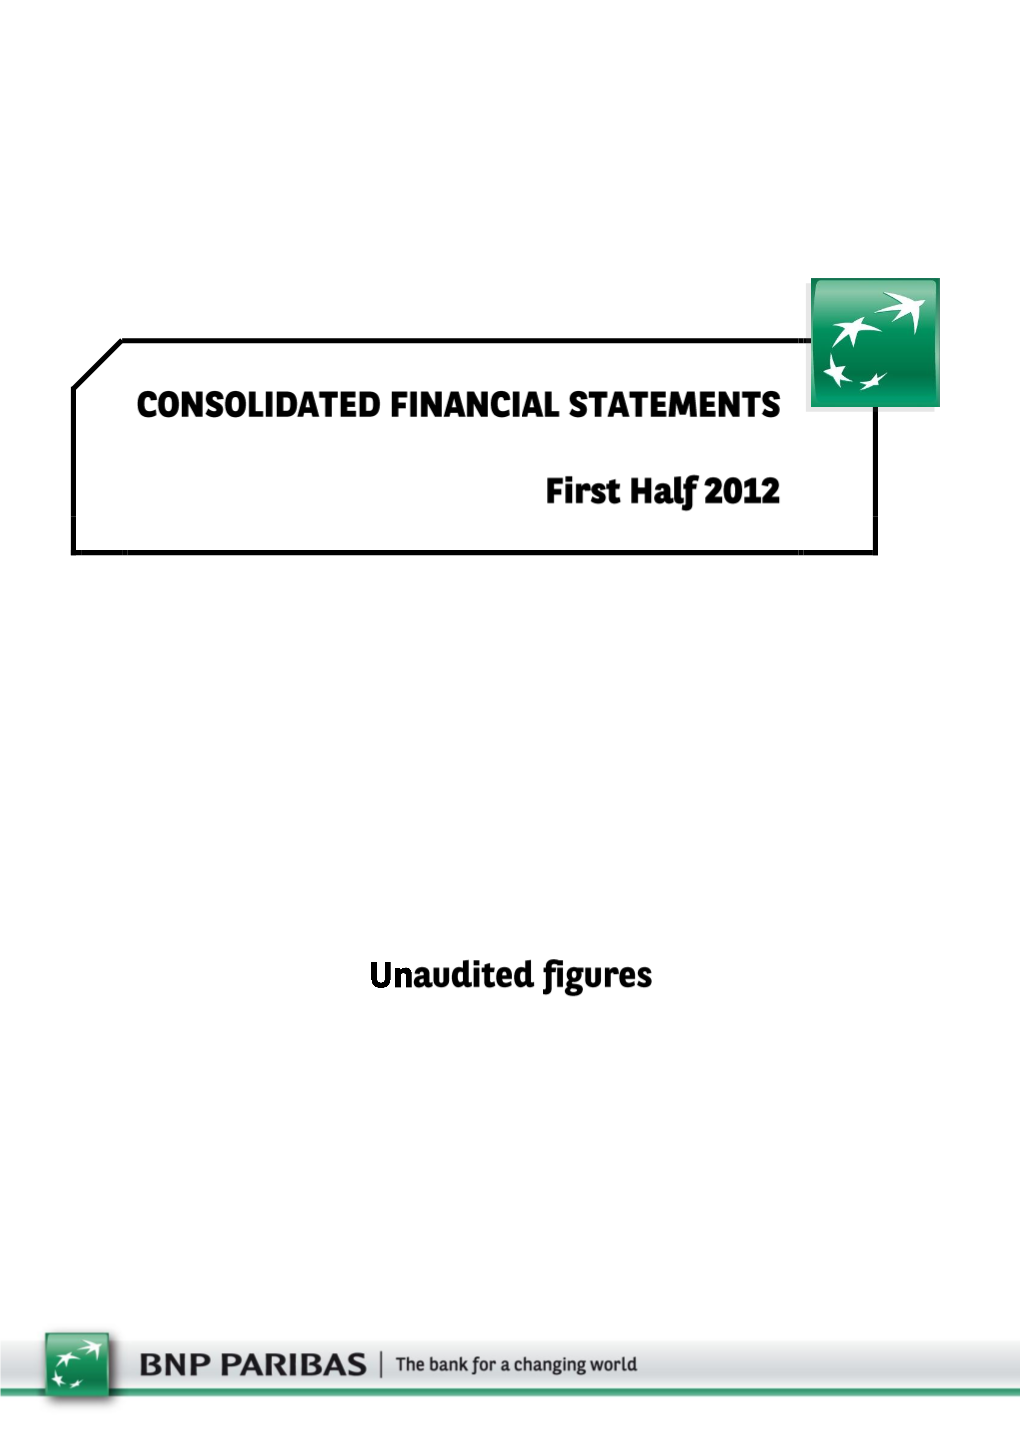 Consolidated Financial Statements at 30 June 2012